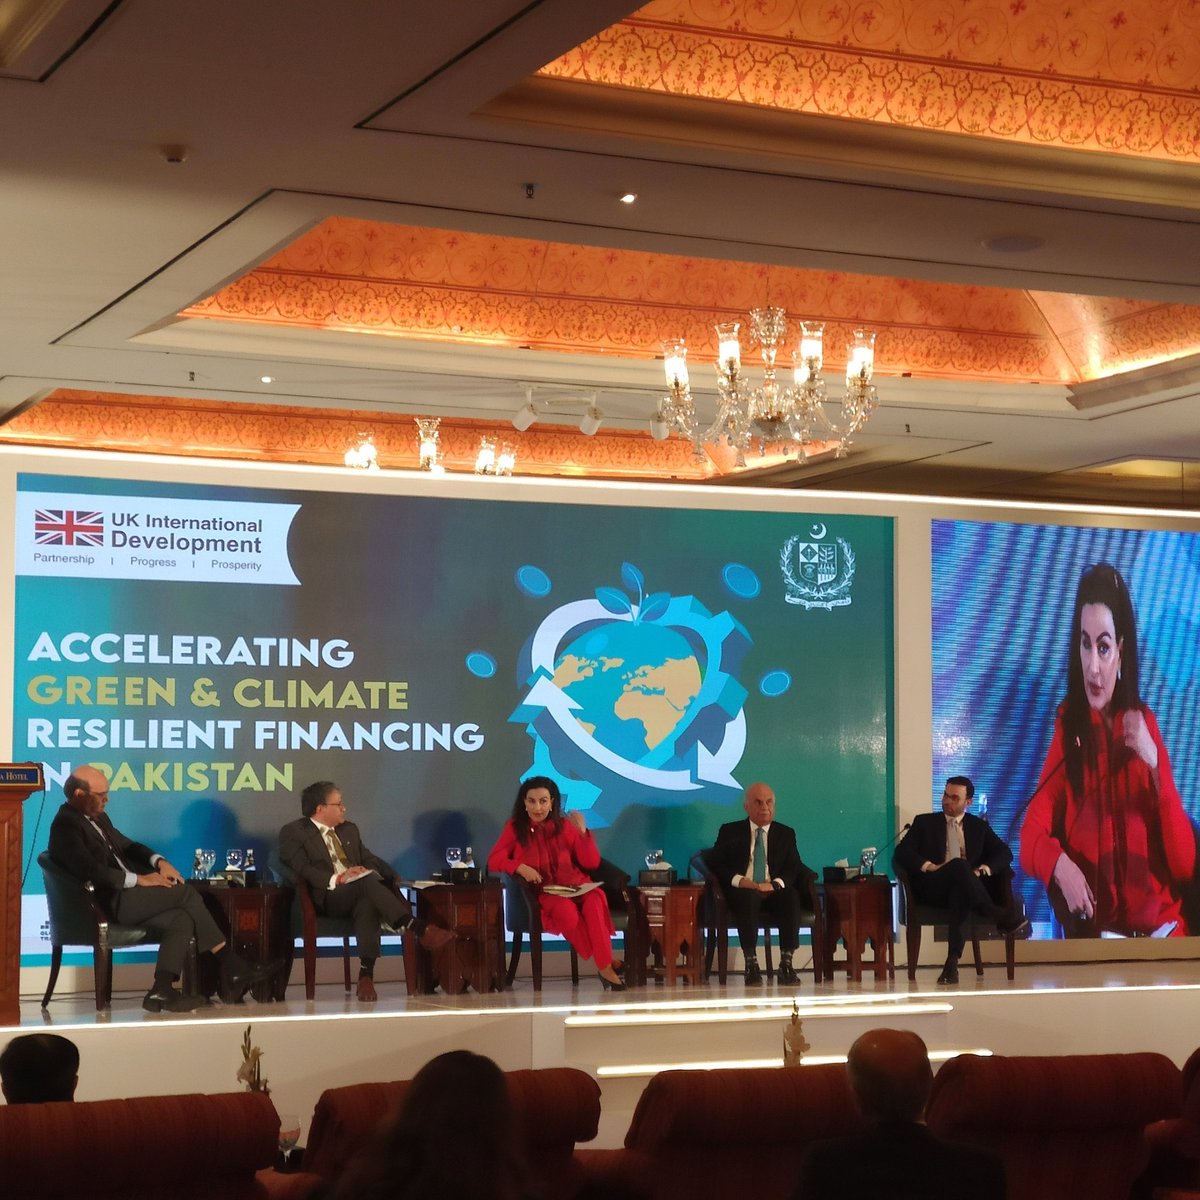 On #LossandDamage and Pakistan: 'We are the lost and damaged', underscoring the urgency of climate action and mobilizing #ClimateFinance for Pakistan @sherryrehman at @ukinpakistan